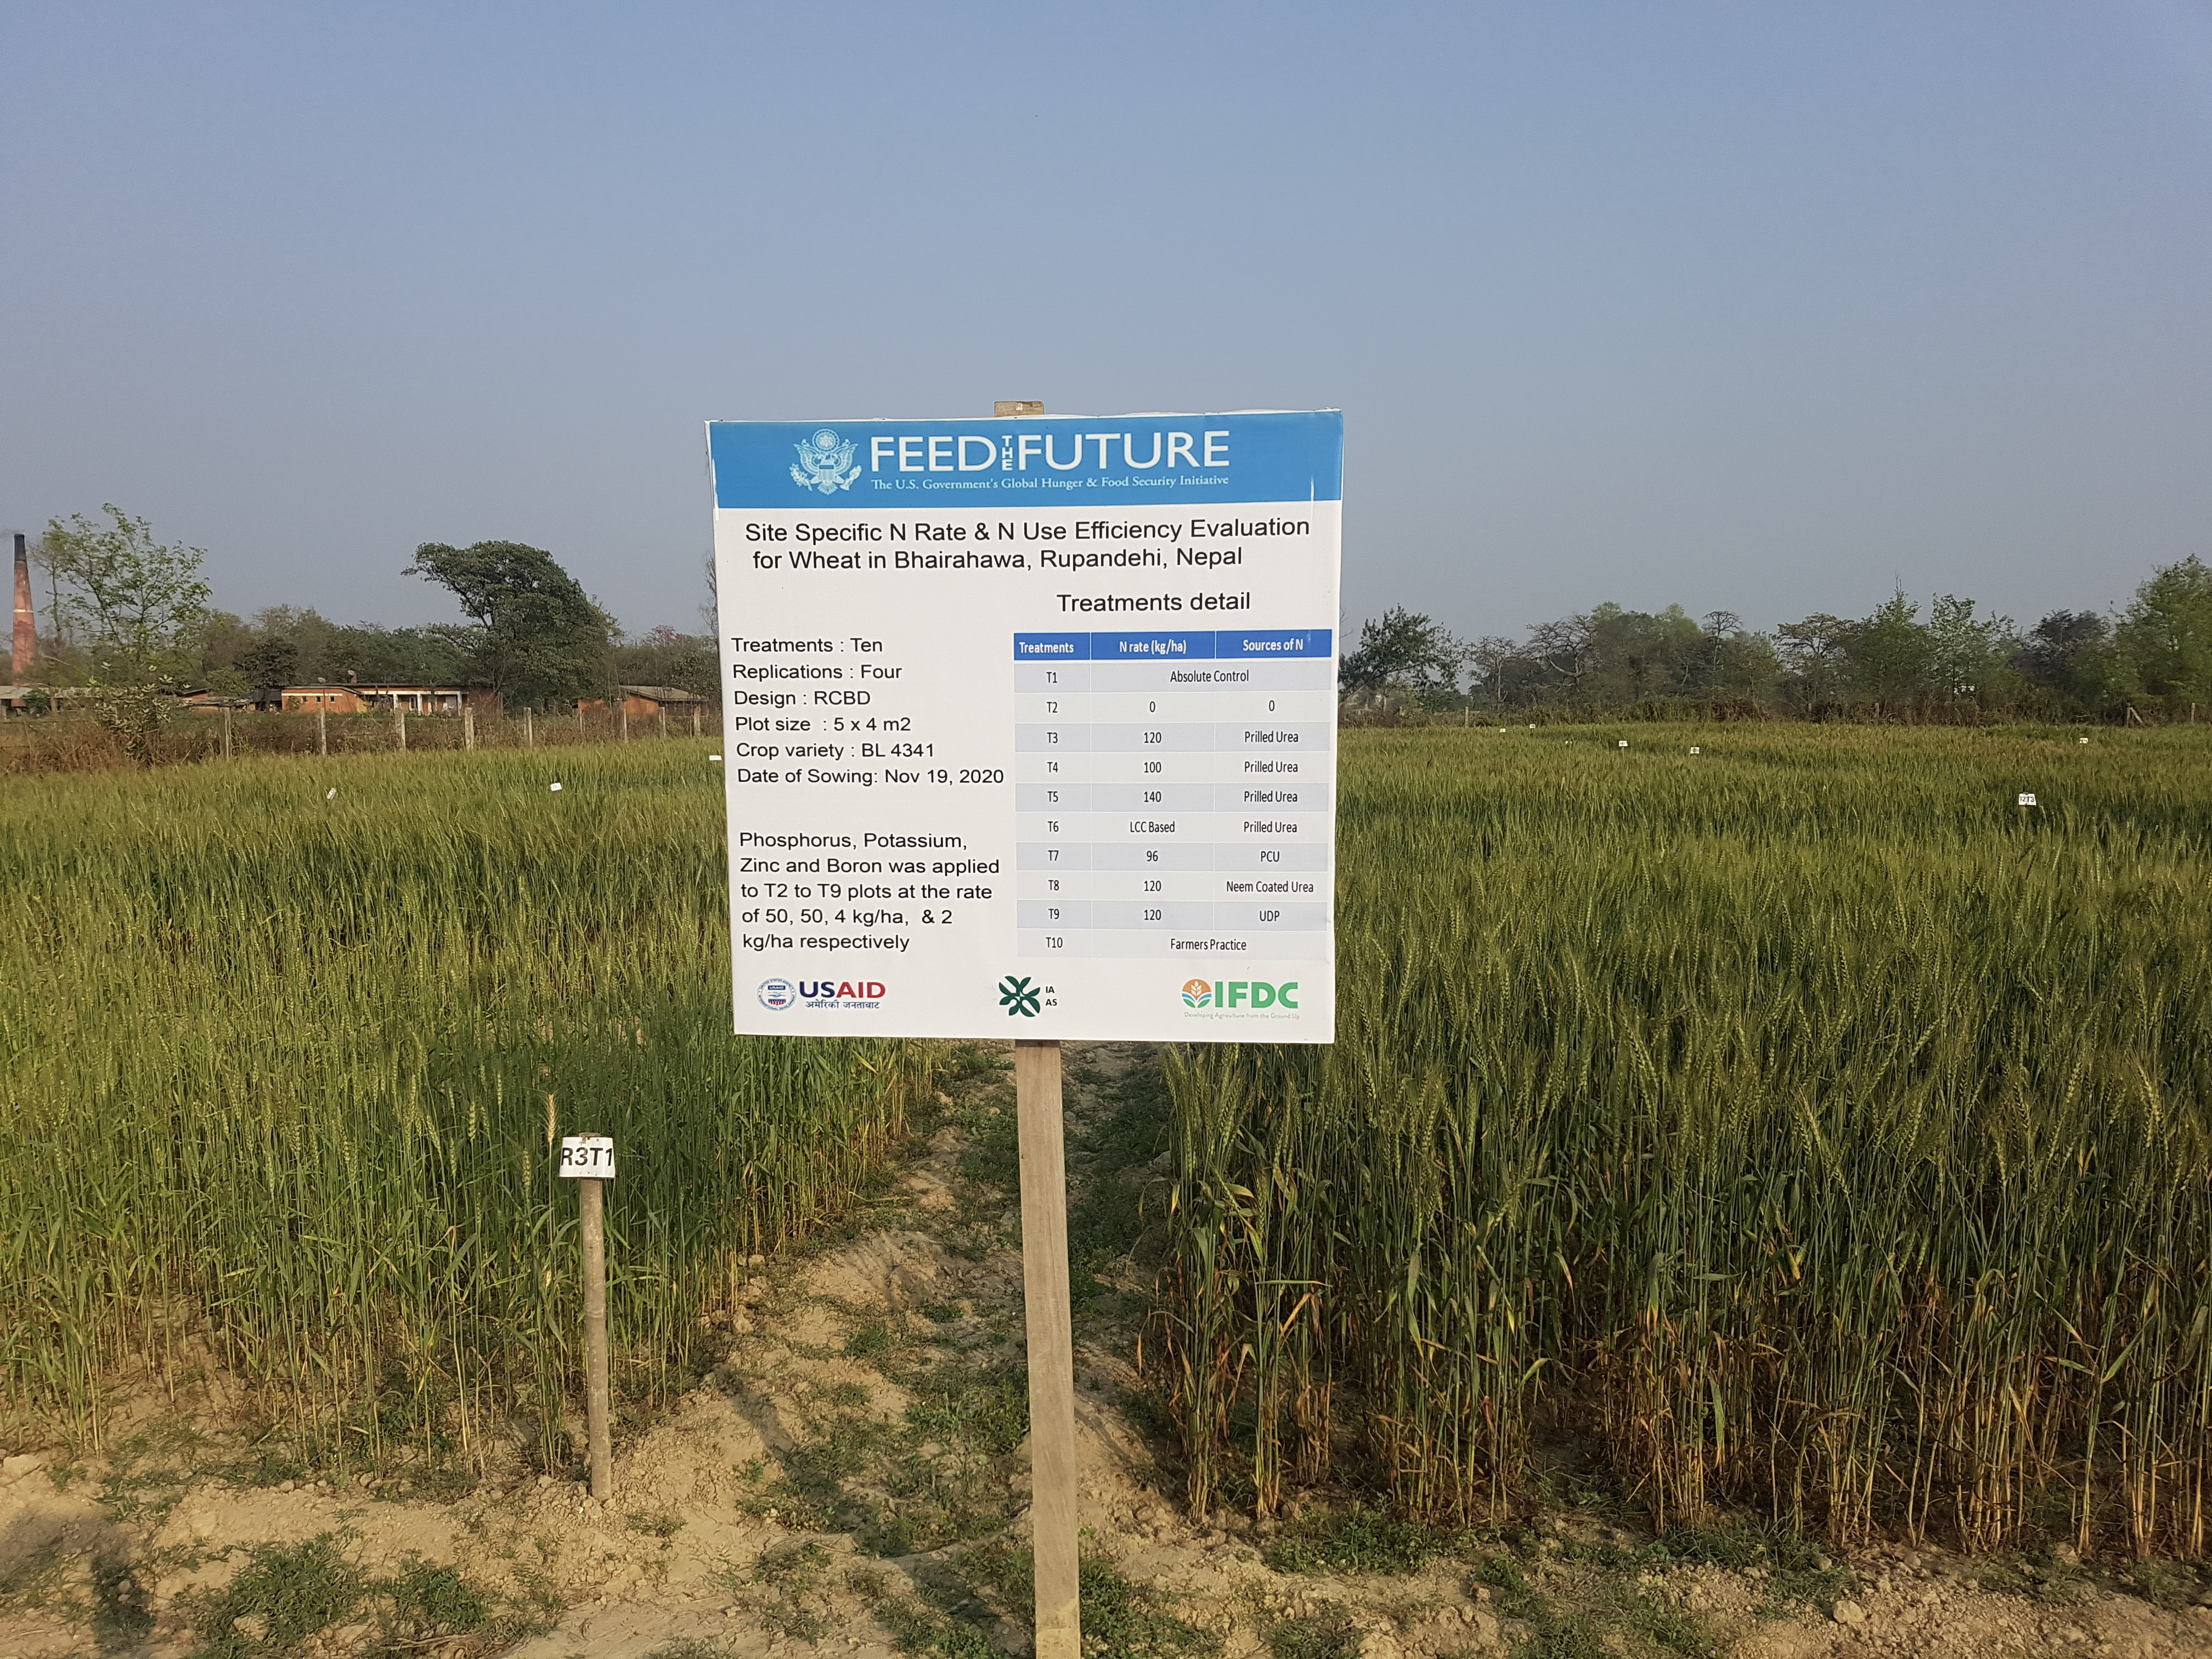 The AFI proNSAF is developing site-specific fertilizer recommendations.ject provides training to strengthen the agricultural value chain in India.